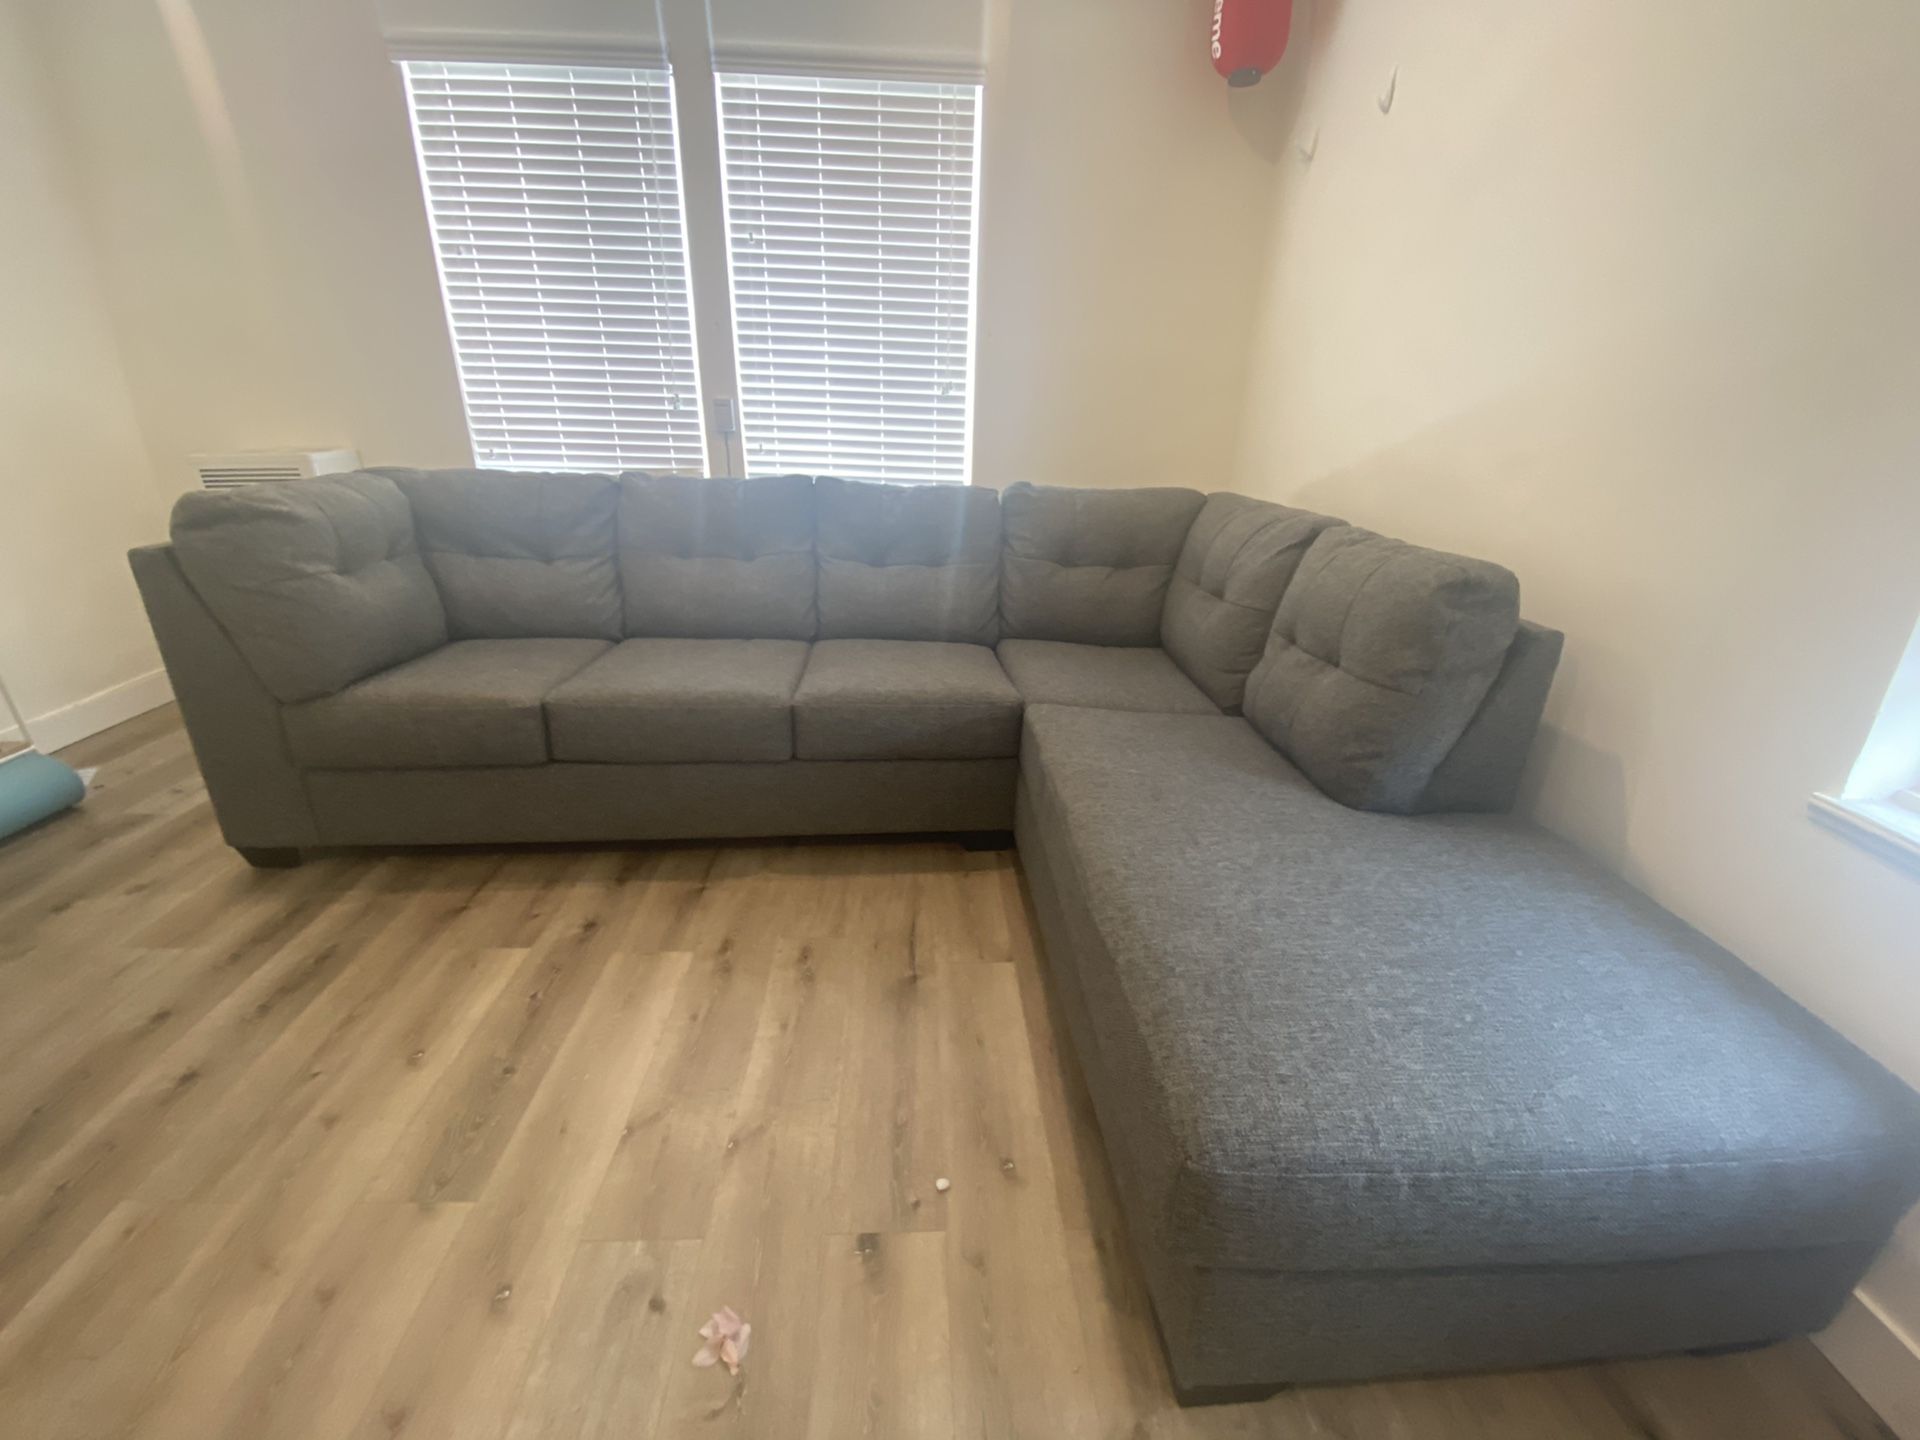 SLEEPER SECTIONAL WITH MATTRESS (LIKE NEW! USED ONLY FOR A MONTH)